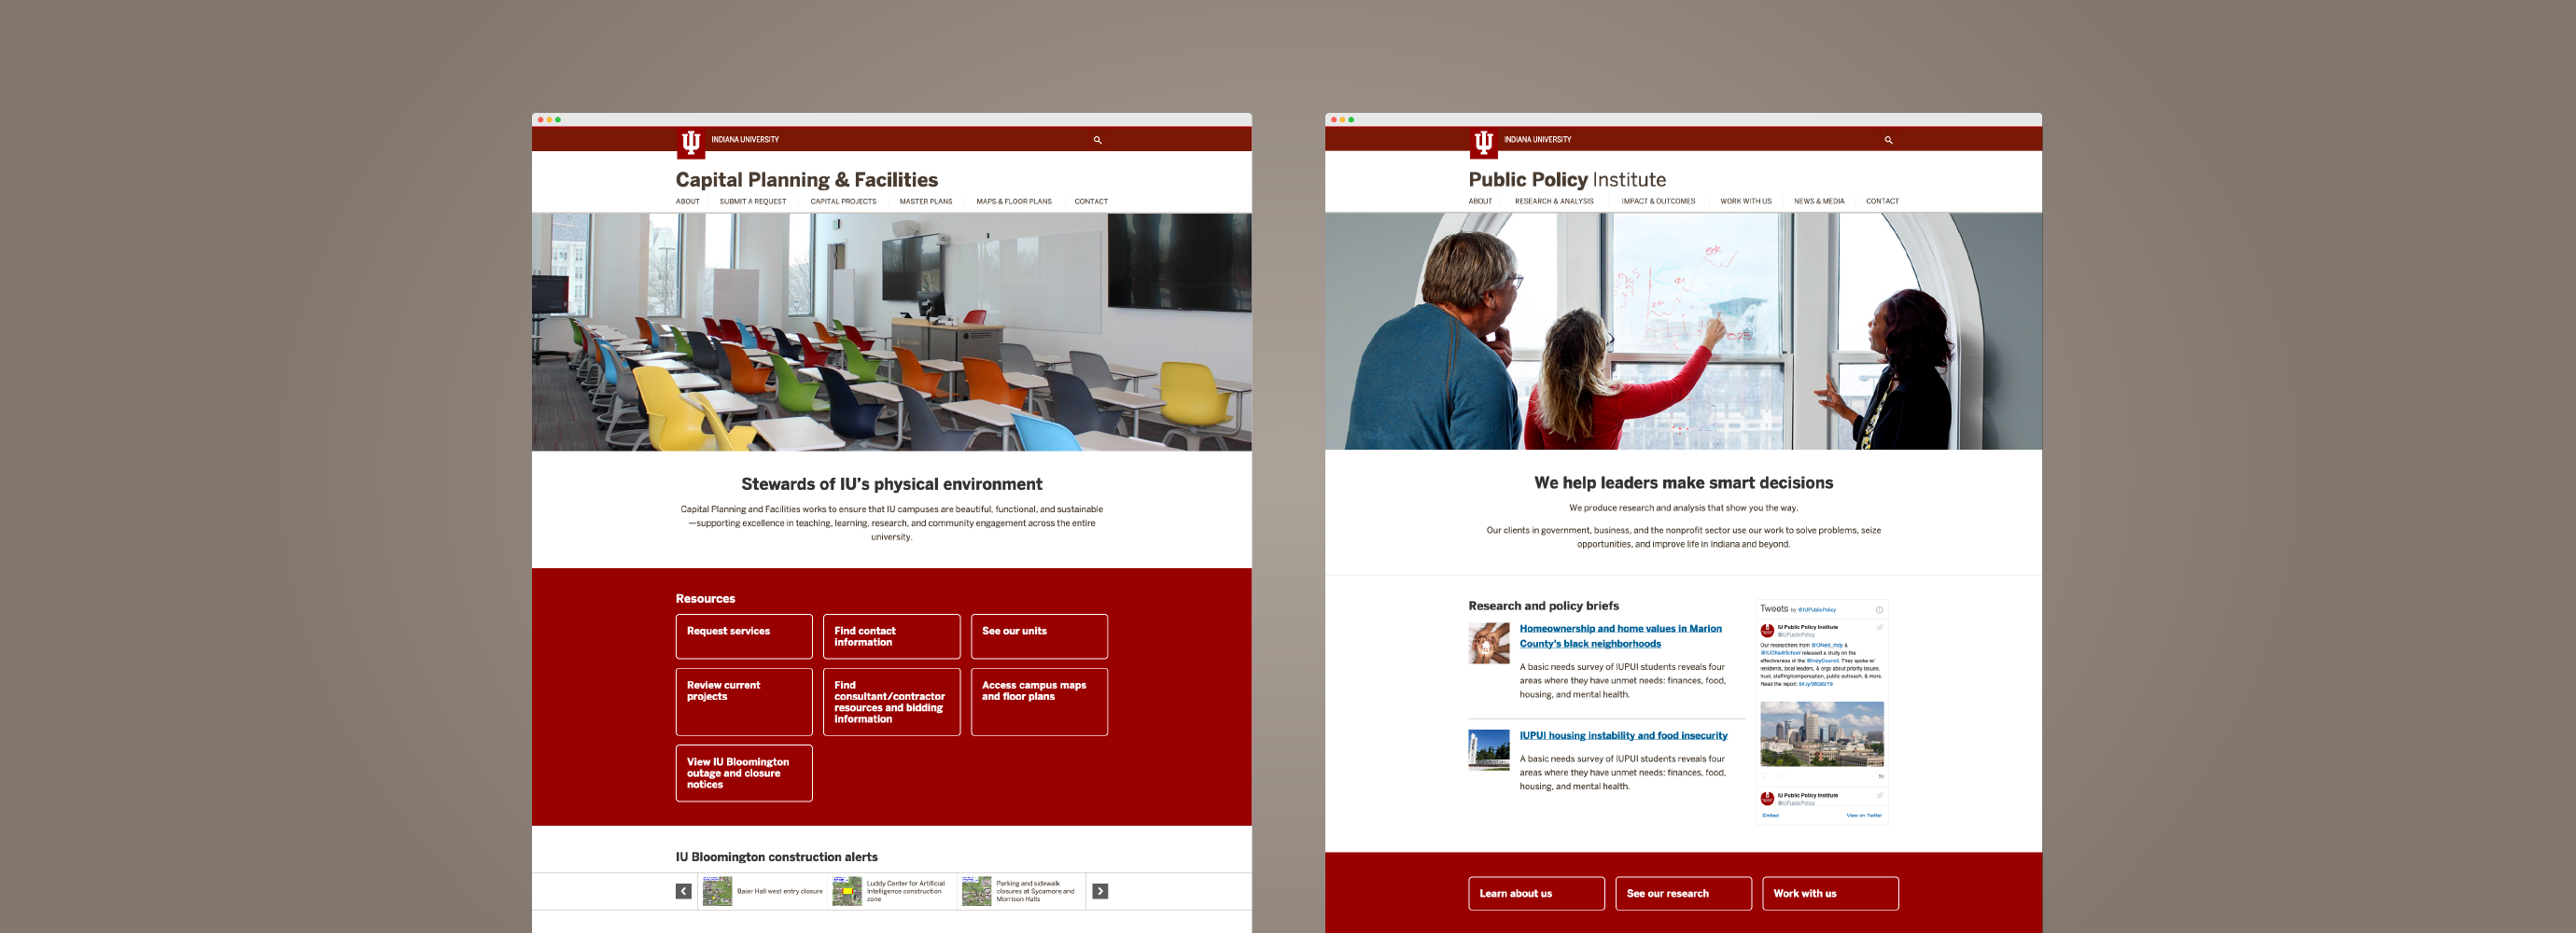 Examples of two webpages — Capital Planning & Facilities and the Public Policy Institute